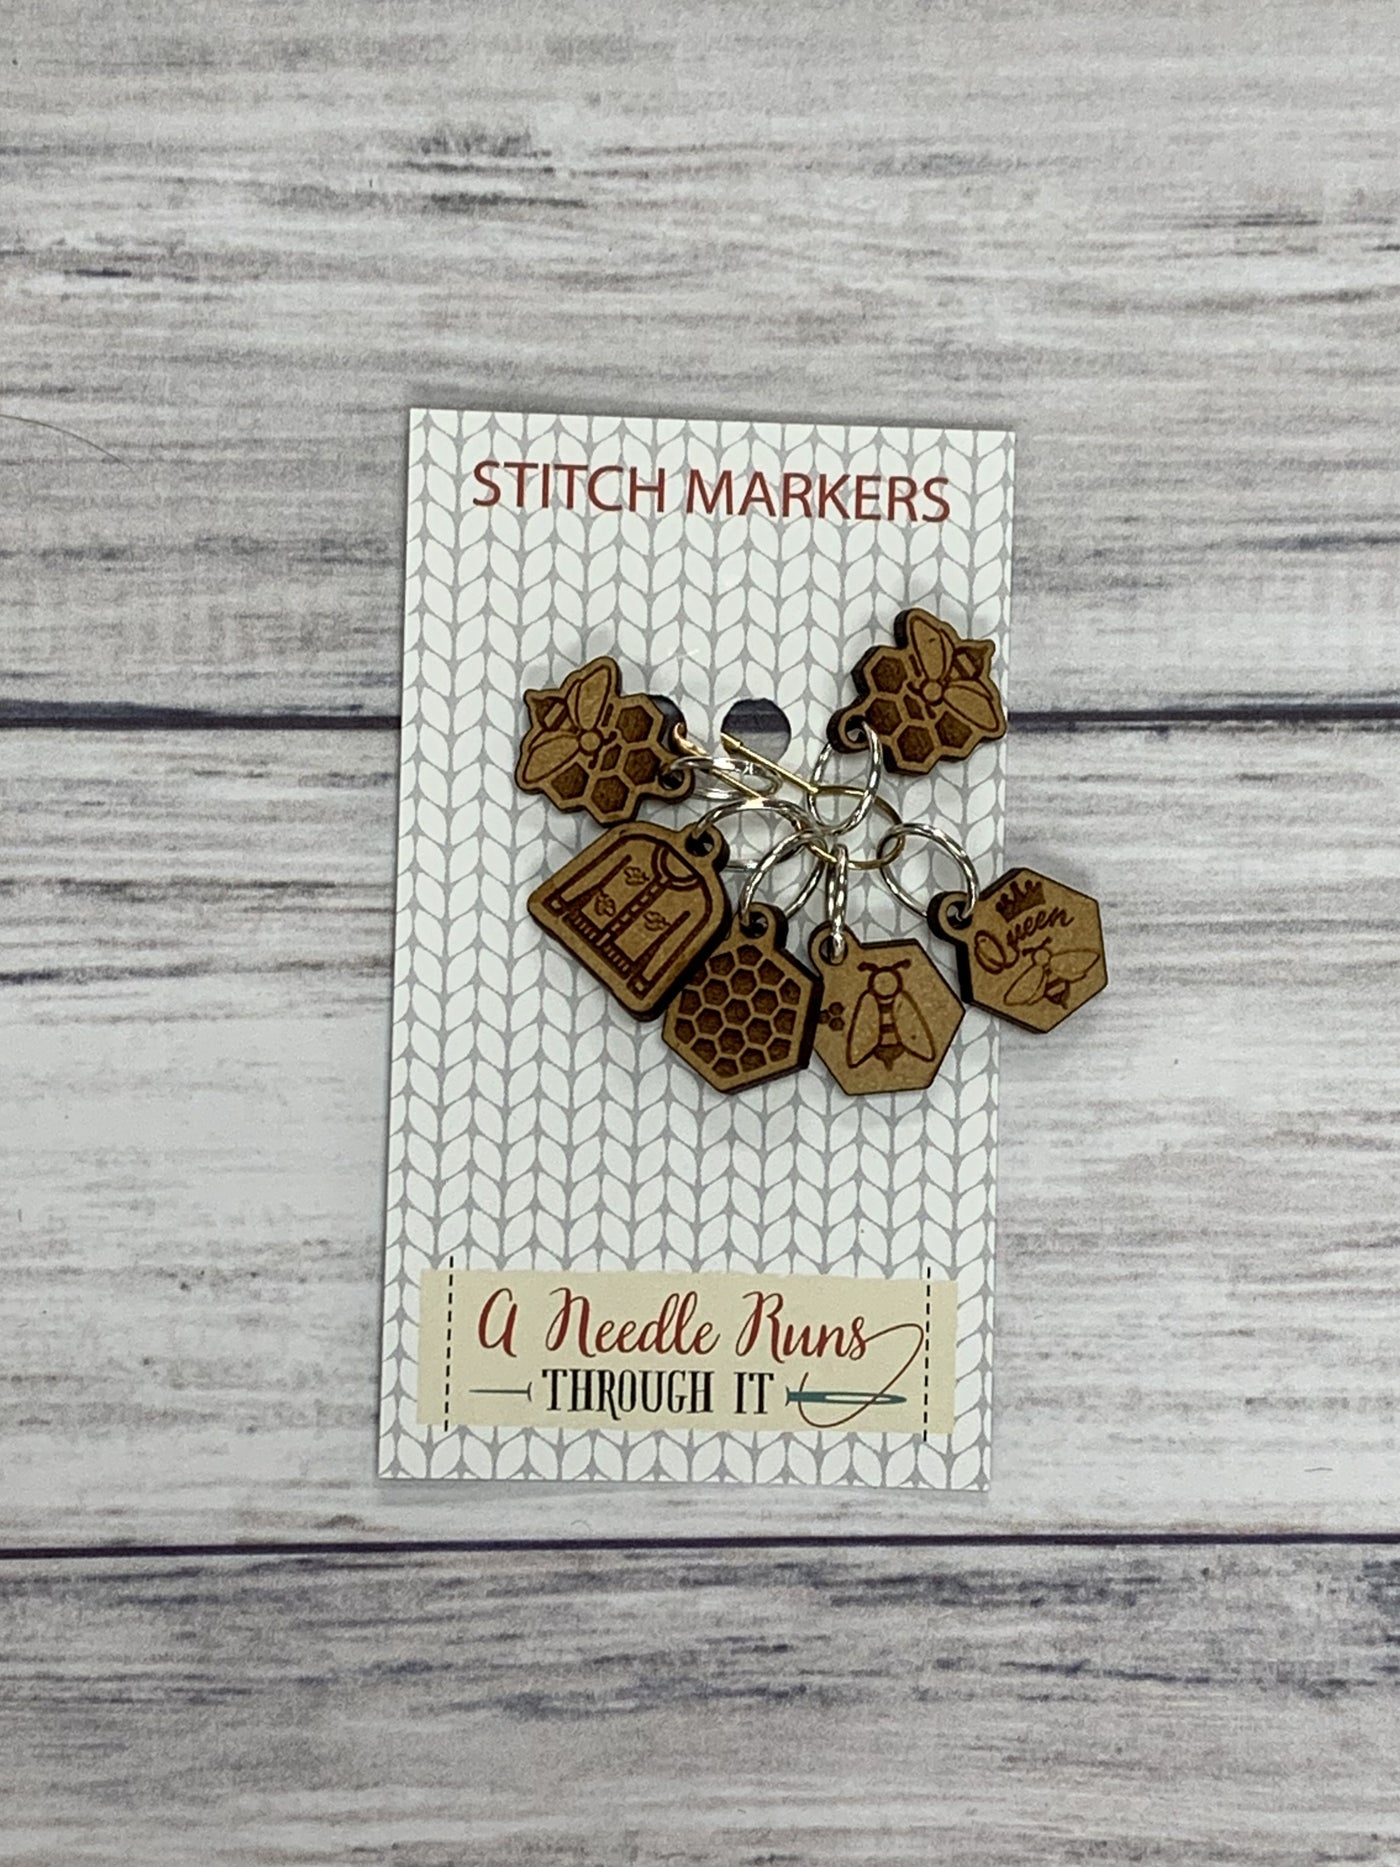 Wooden Ring Stitch Markers by A Needle Runs Though It